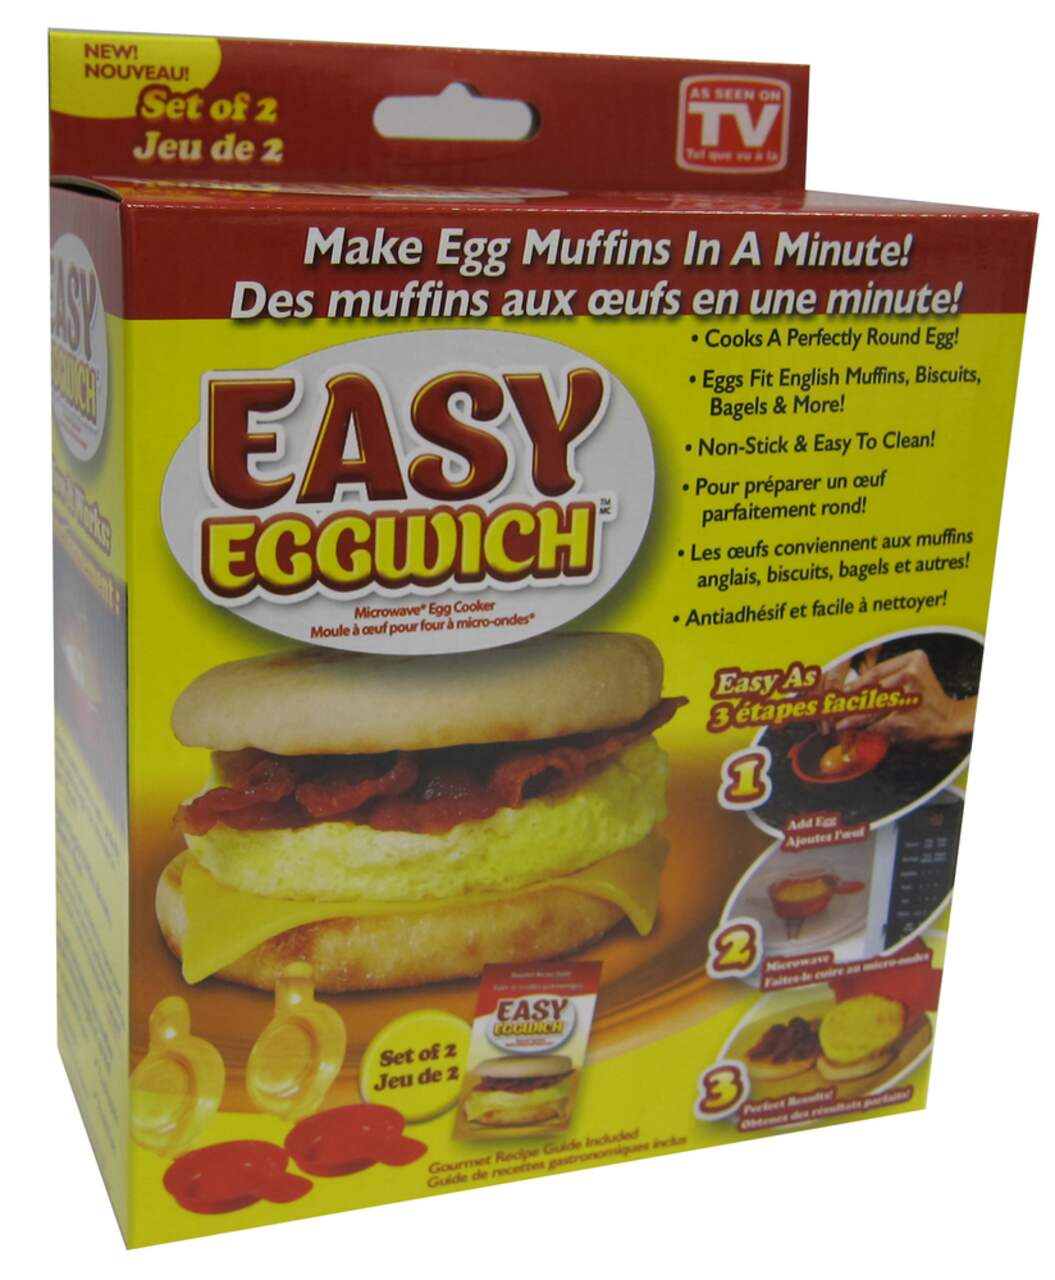 https://media-www.canadiantire.ca/product/living/as-seen-on-tv/asotv/2995290/asotv-easy-eggwich-f49d7ef0-b0cc-4ef8-a410-9d58e64bc8e7.png?imdensity=1&imwidth=640&impolicy=mZoom